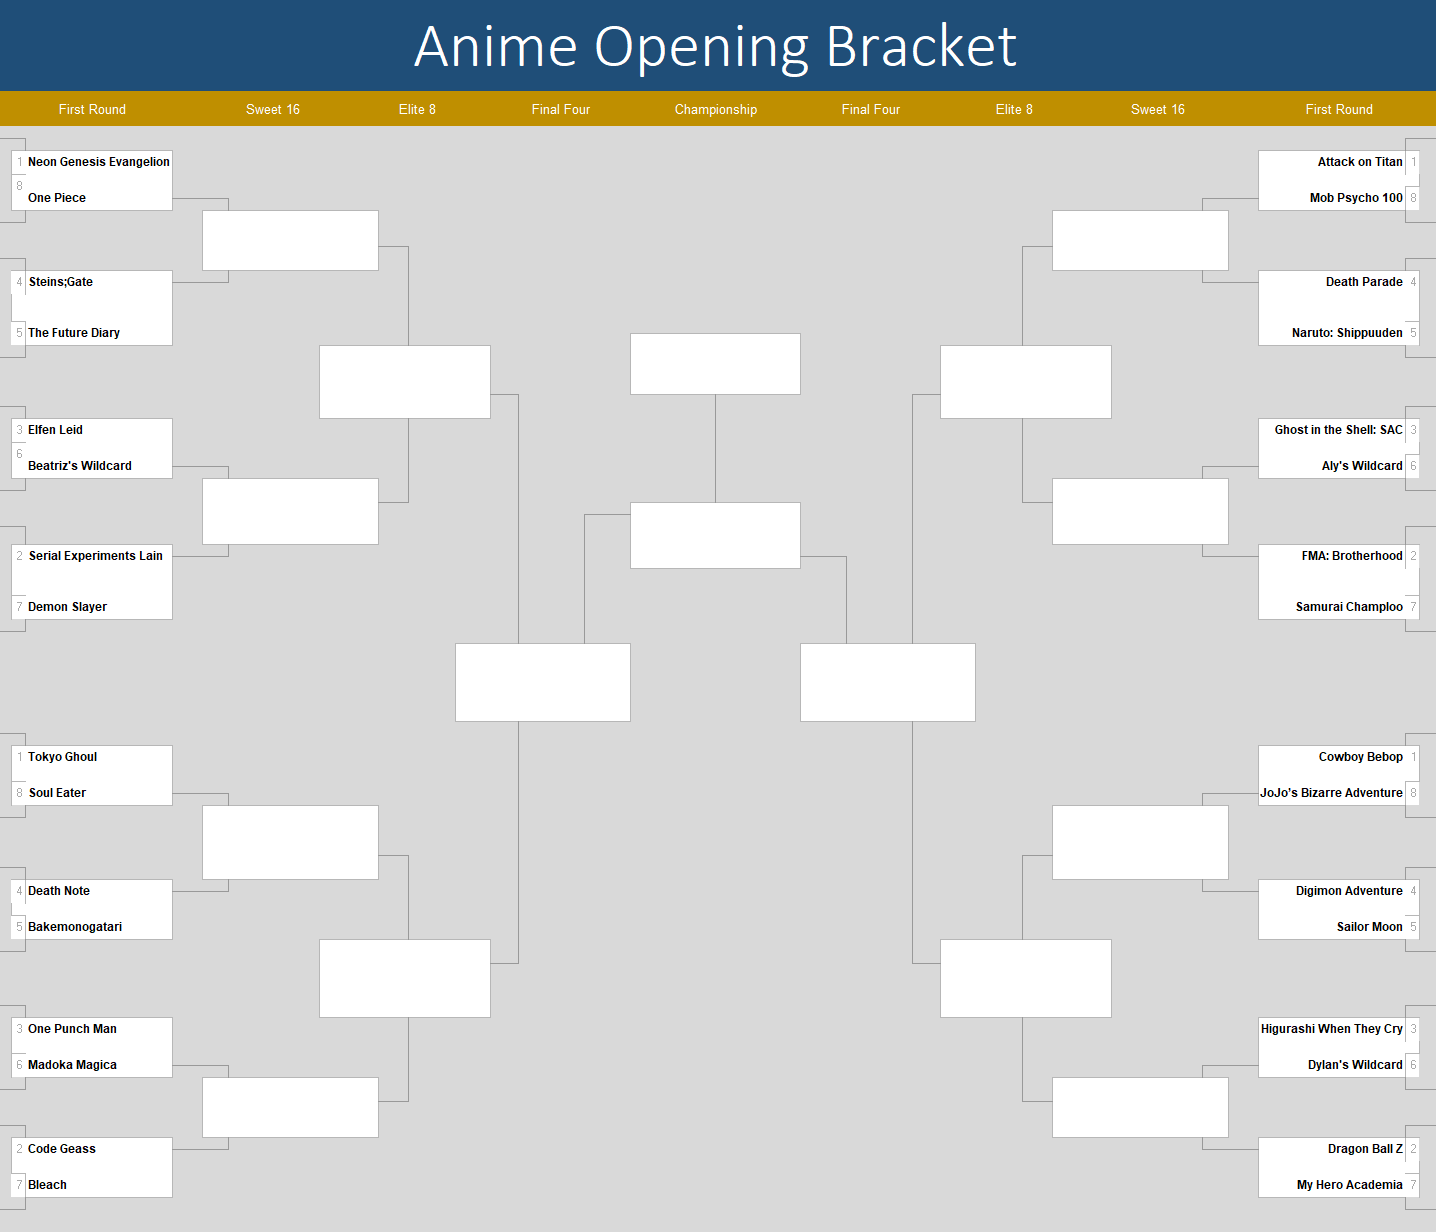 BEST Anime Openings Tournament